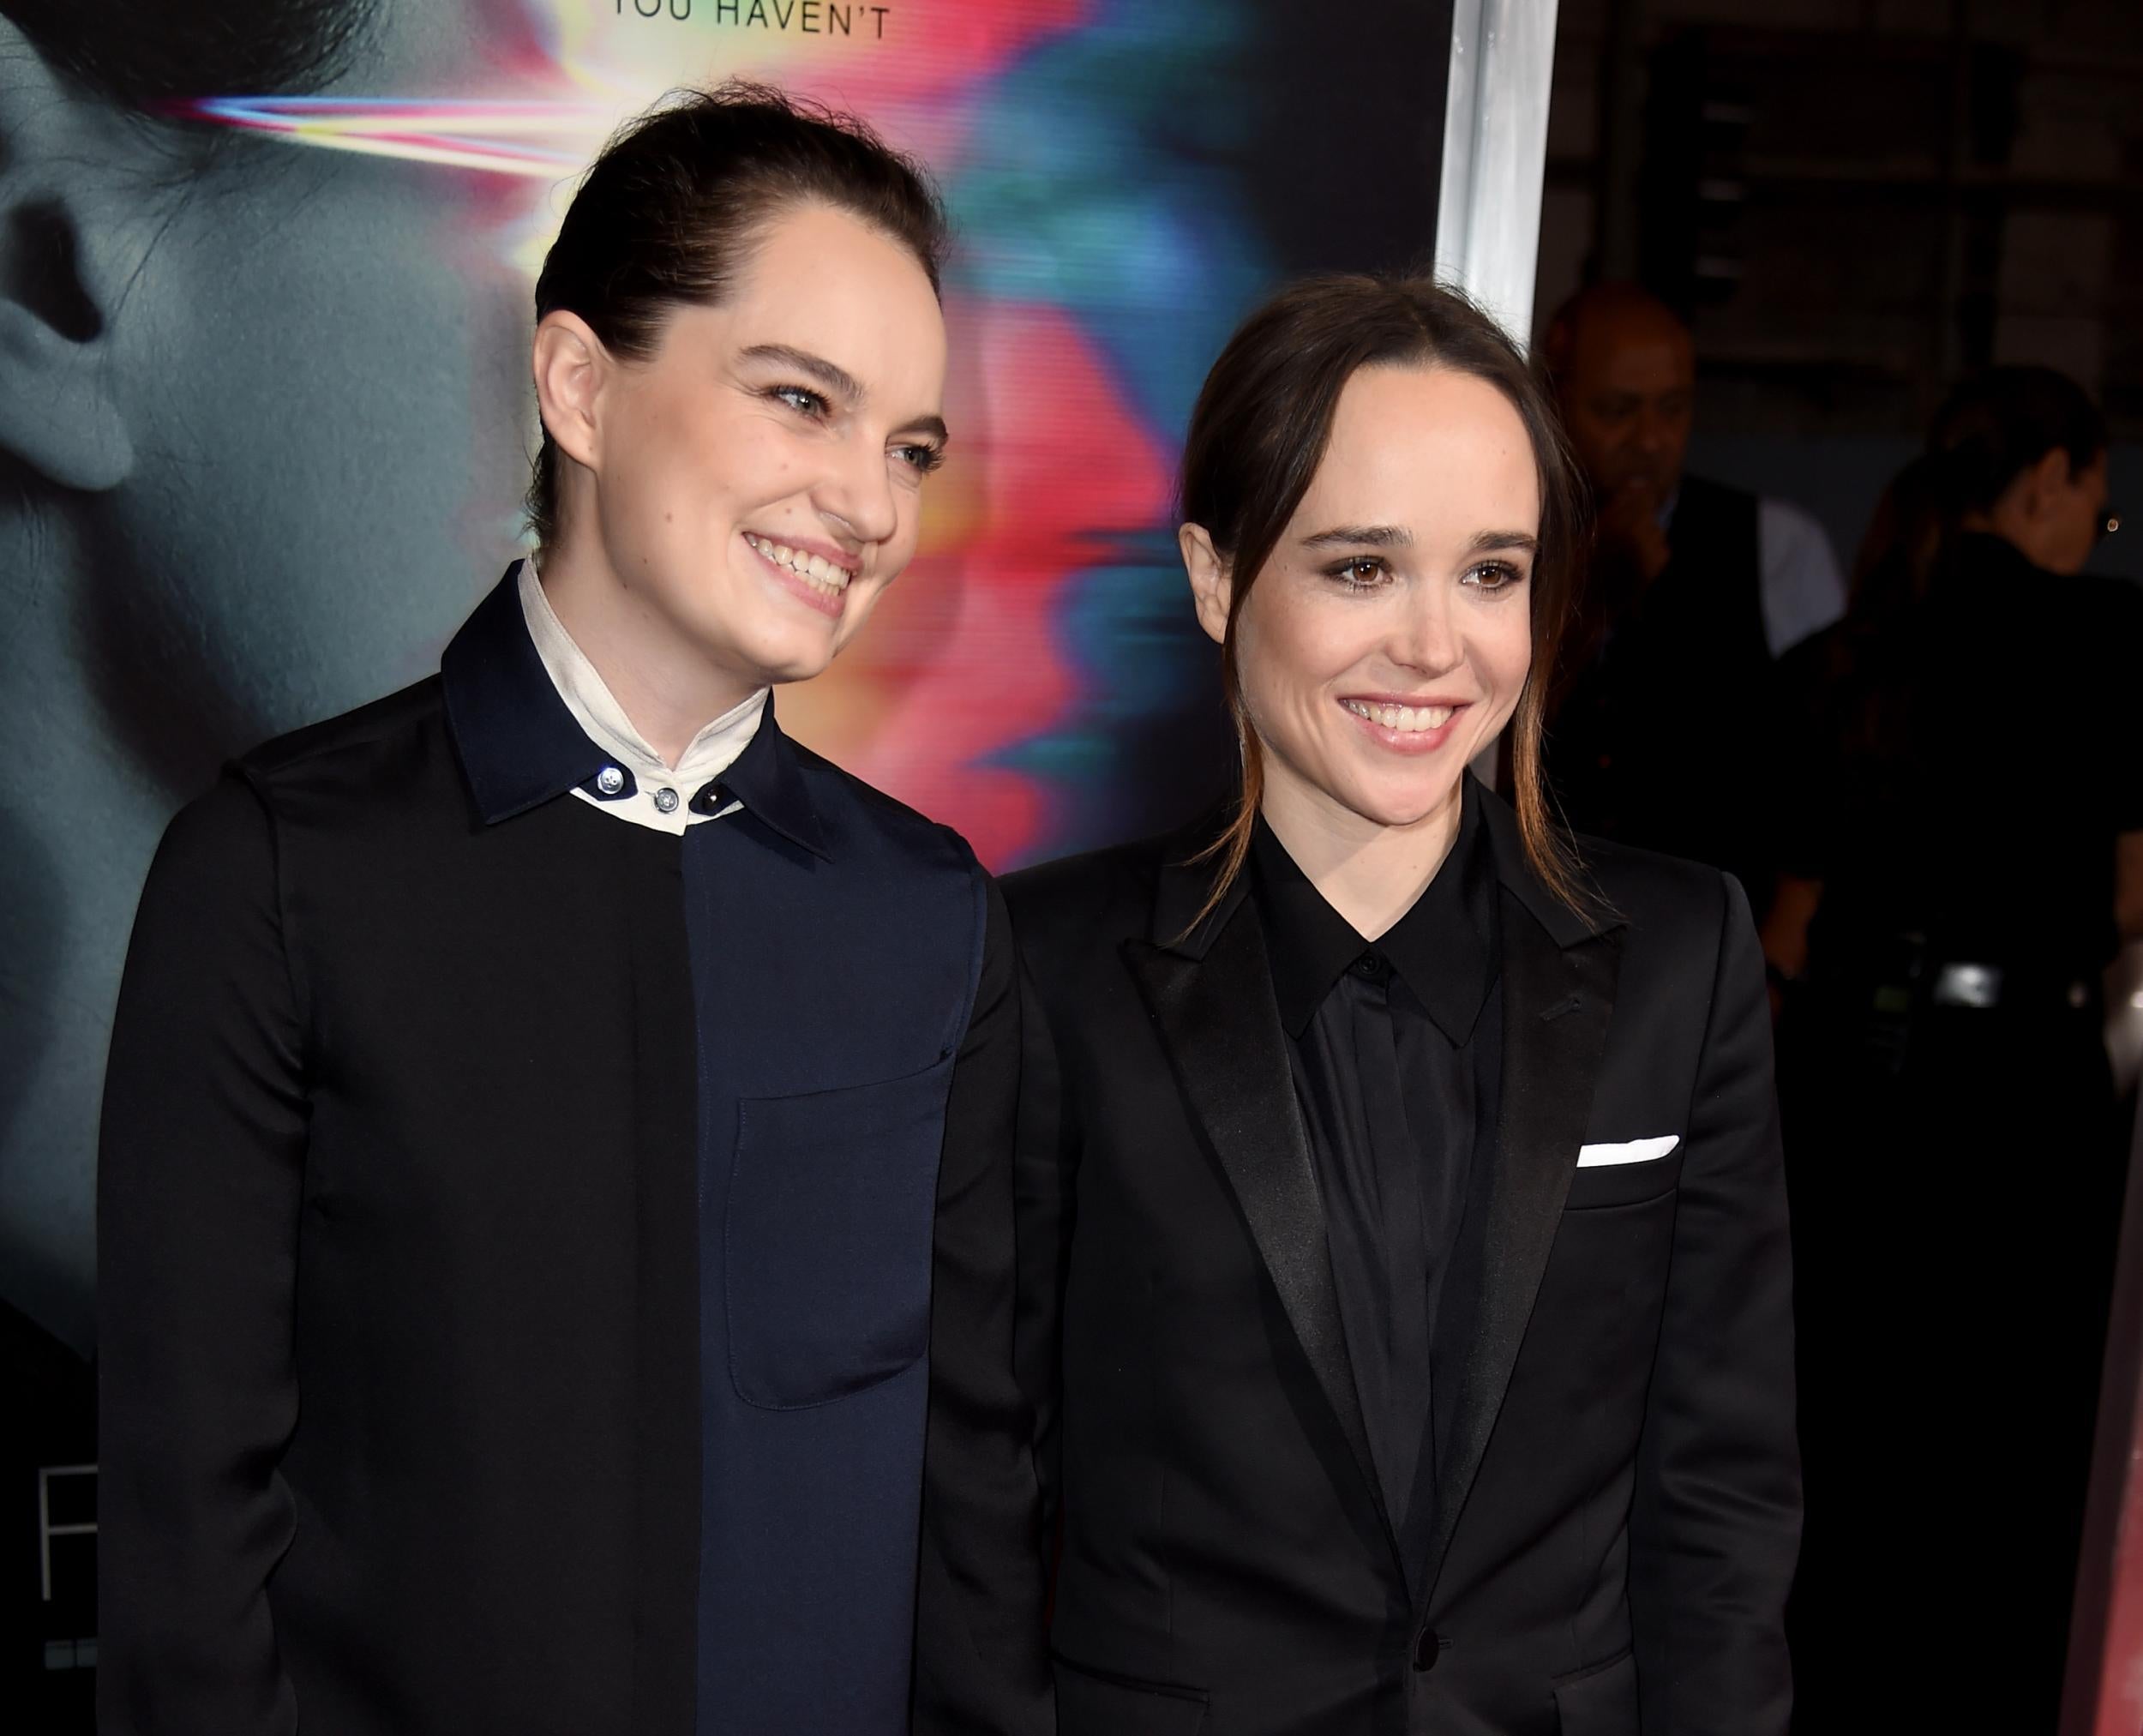 Ellen Page marries dancer Emma Porter sharing beautiful wedding photo The Independent The Independent photo